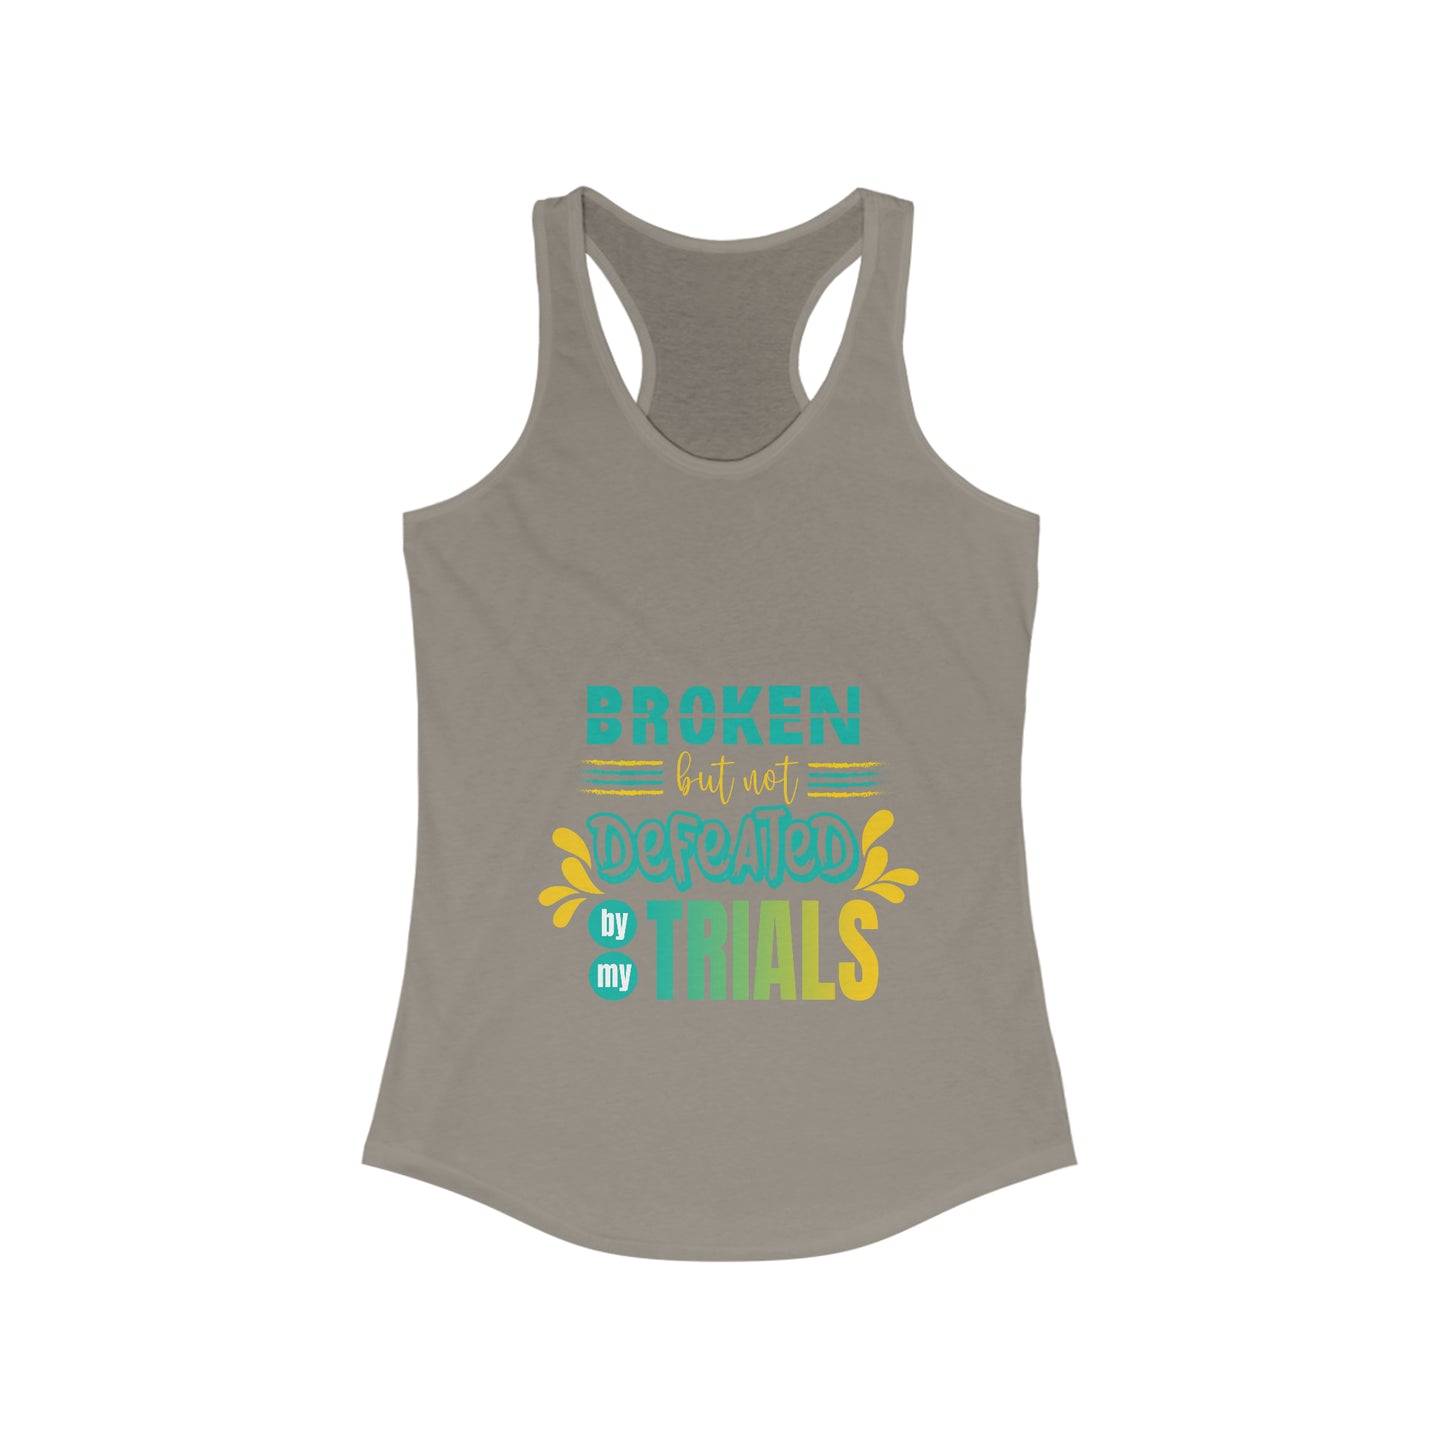 Broken but not Defeated By My Trials slim fit tank-top